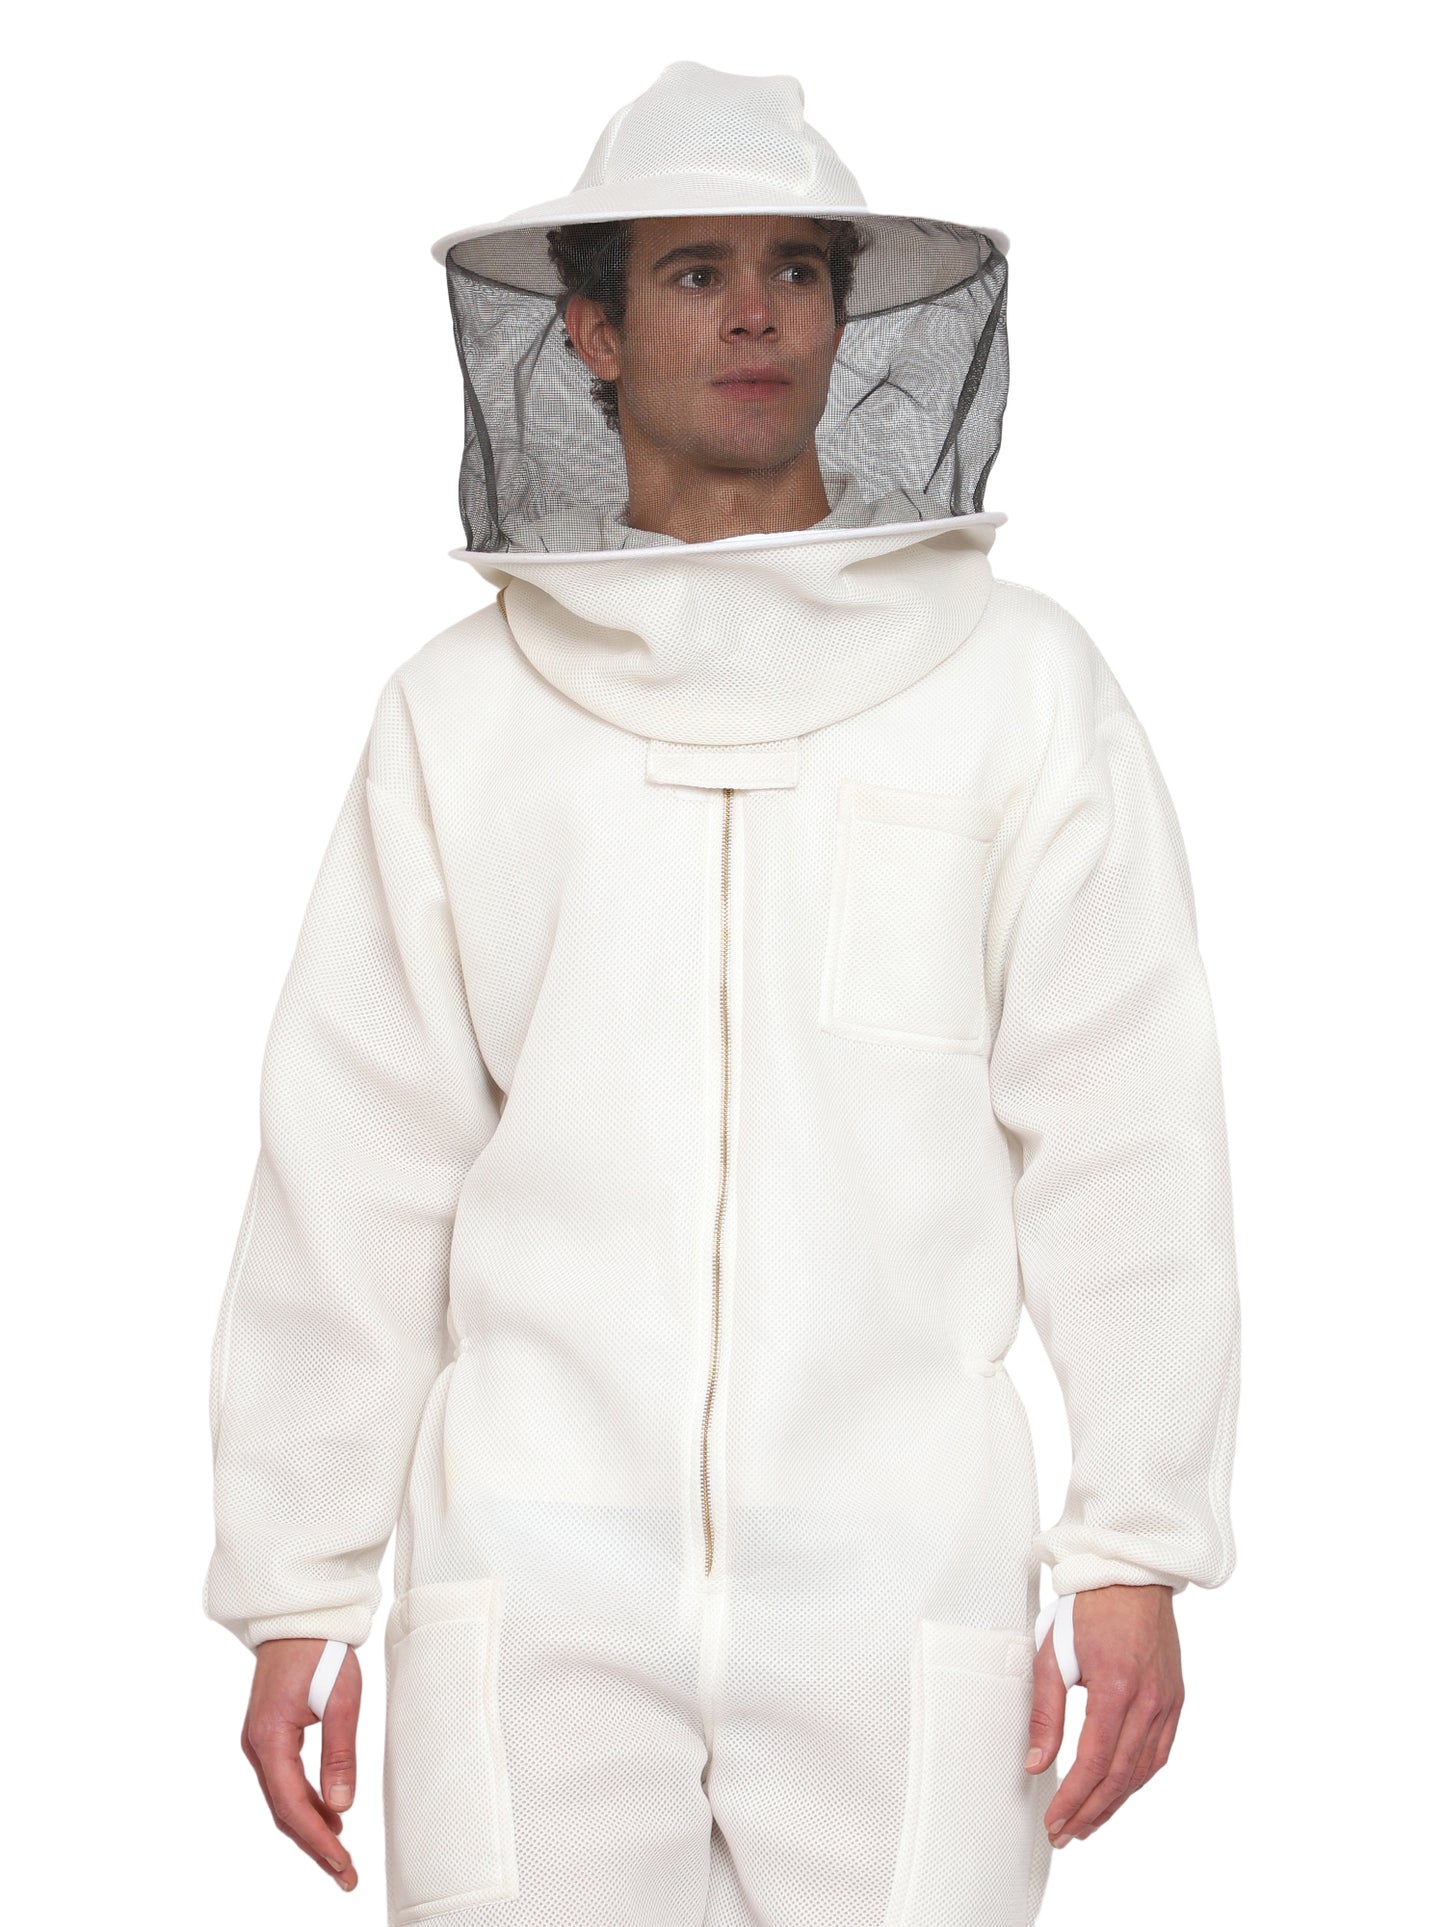 Beeattire Airmesh Ventilated beekeeping Suit White Color with Round Hood